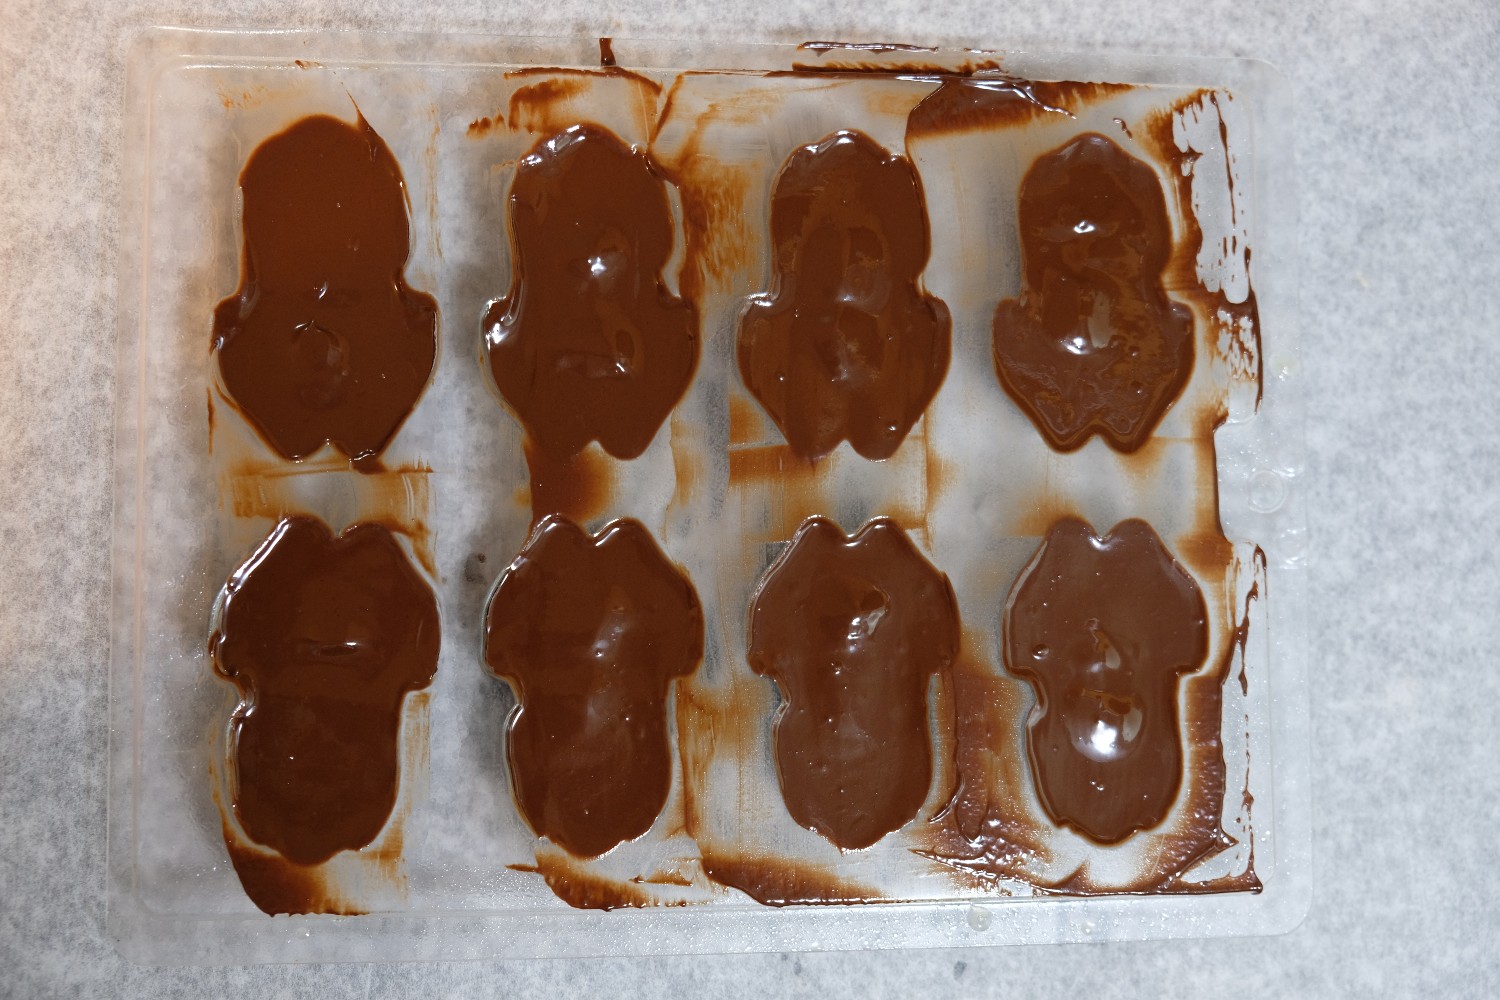 Chocolate Frogs piped in the mold